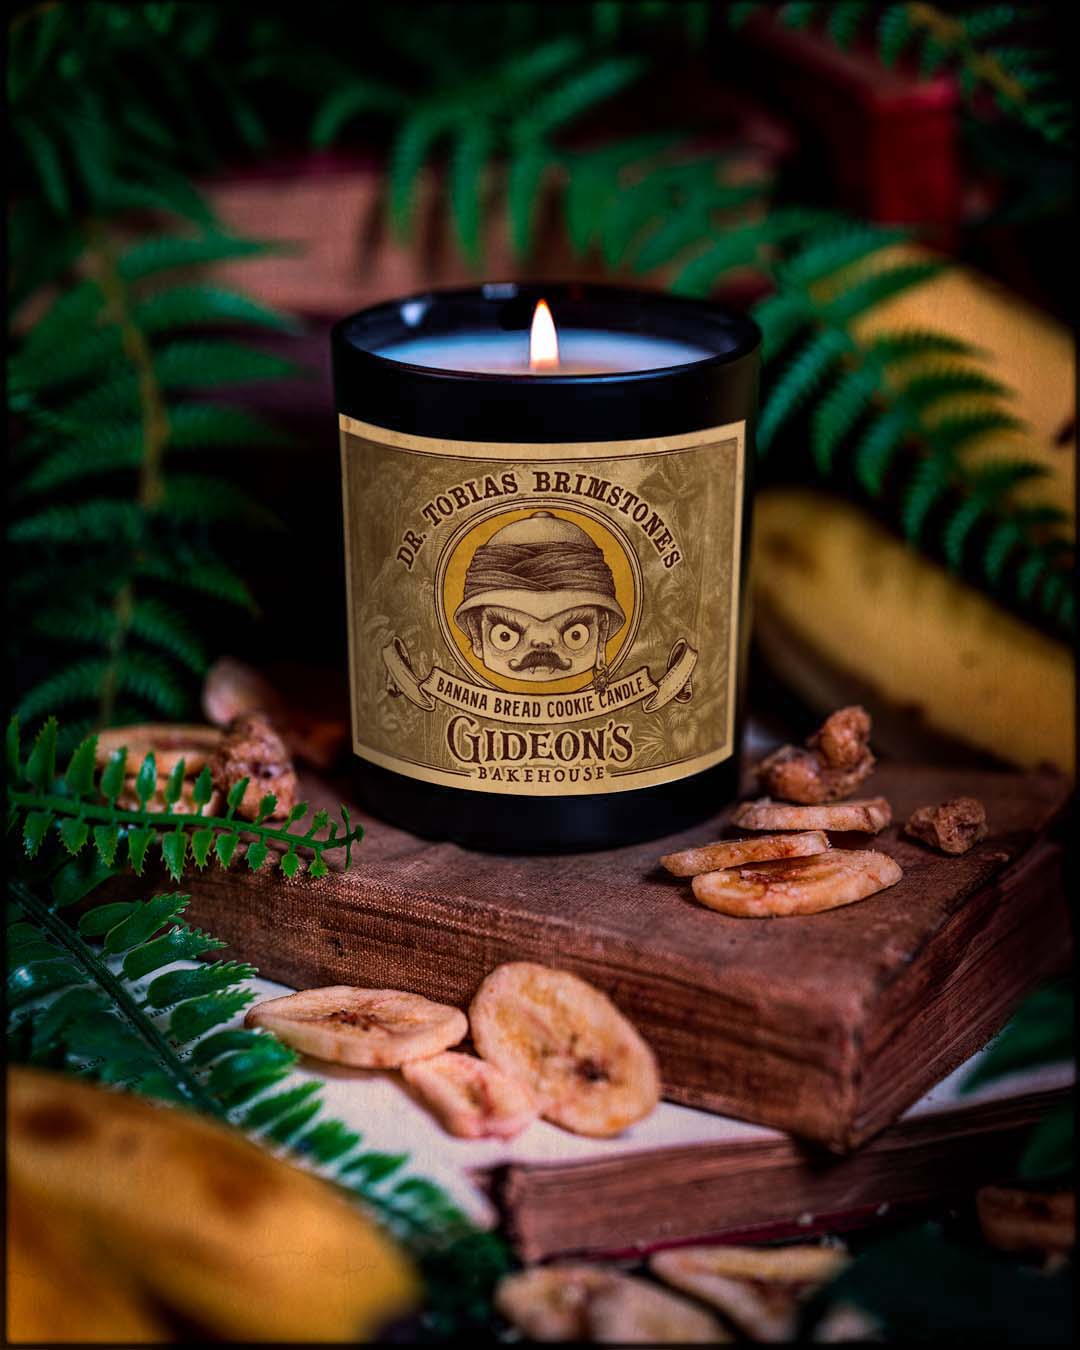 Banana Bread Cookie Candle!